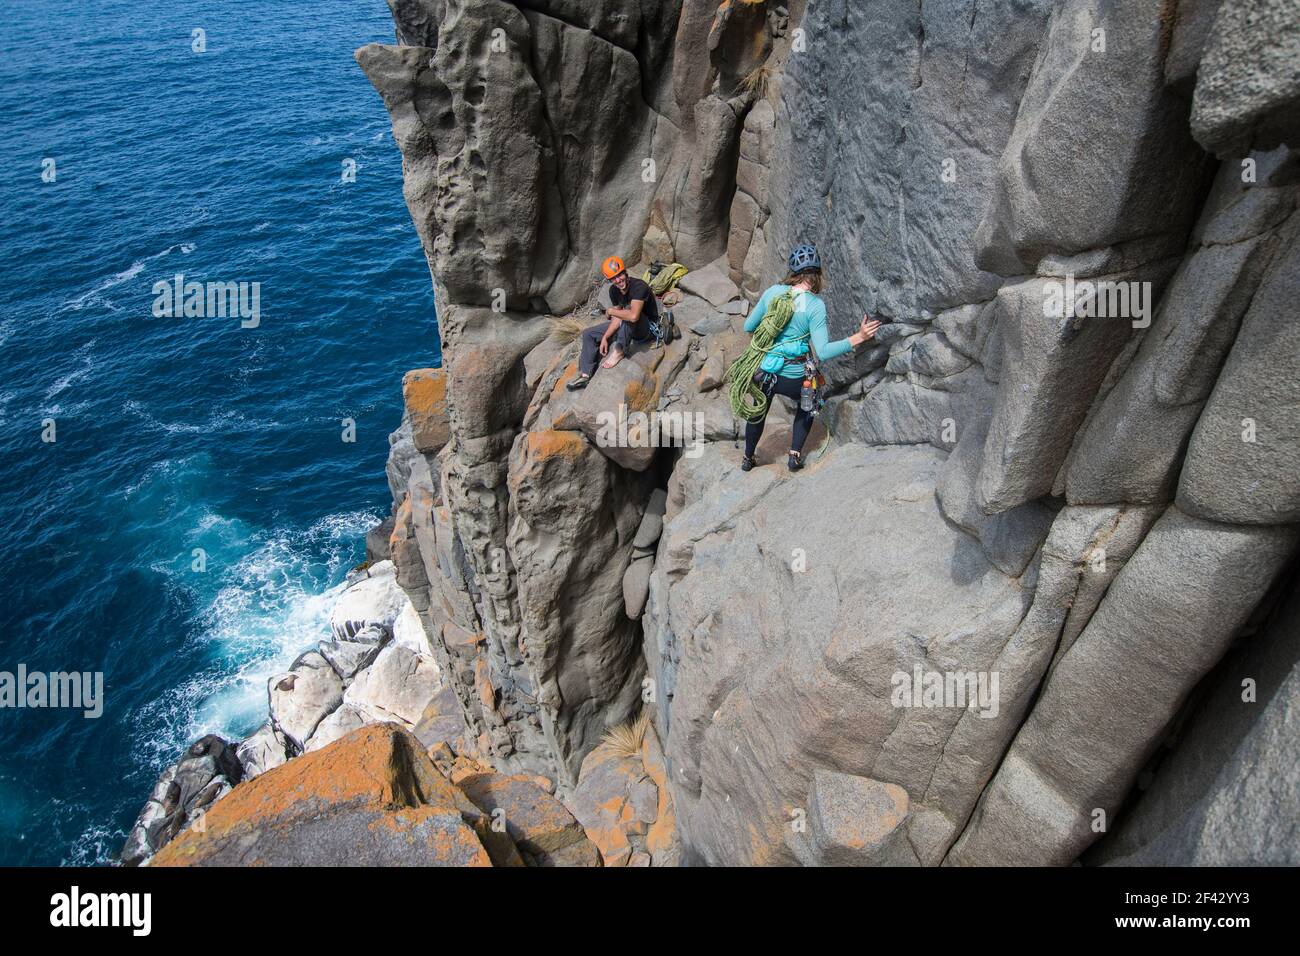 A couple of intrepid rockclimbers explore the featured sea cliffs of Cape Raoul, smiling at each other as they traverse the exposed terrain above a seal colony, in Tasmania, Australia. Stock Photo